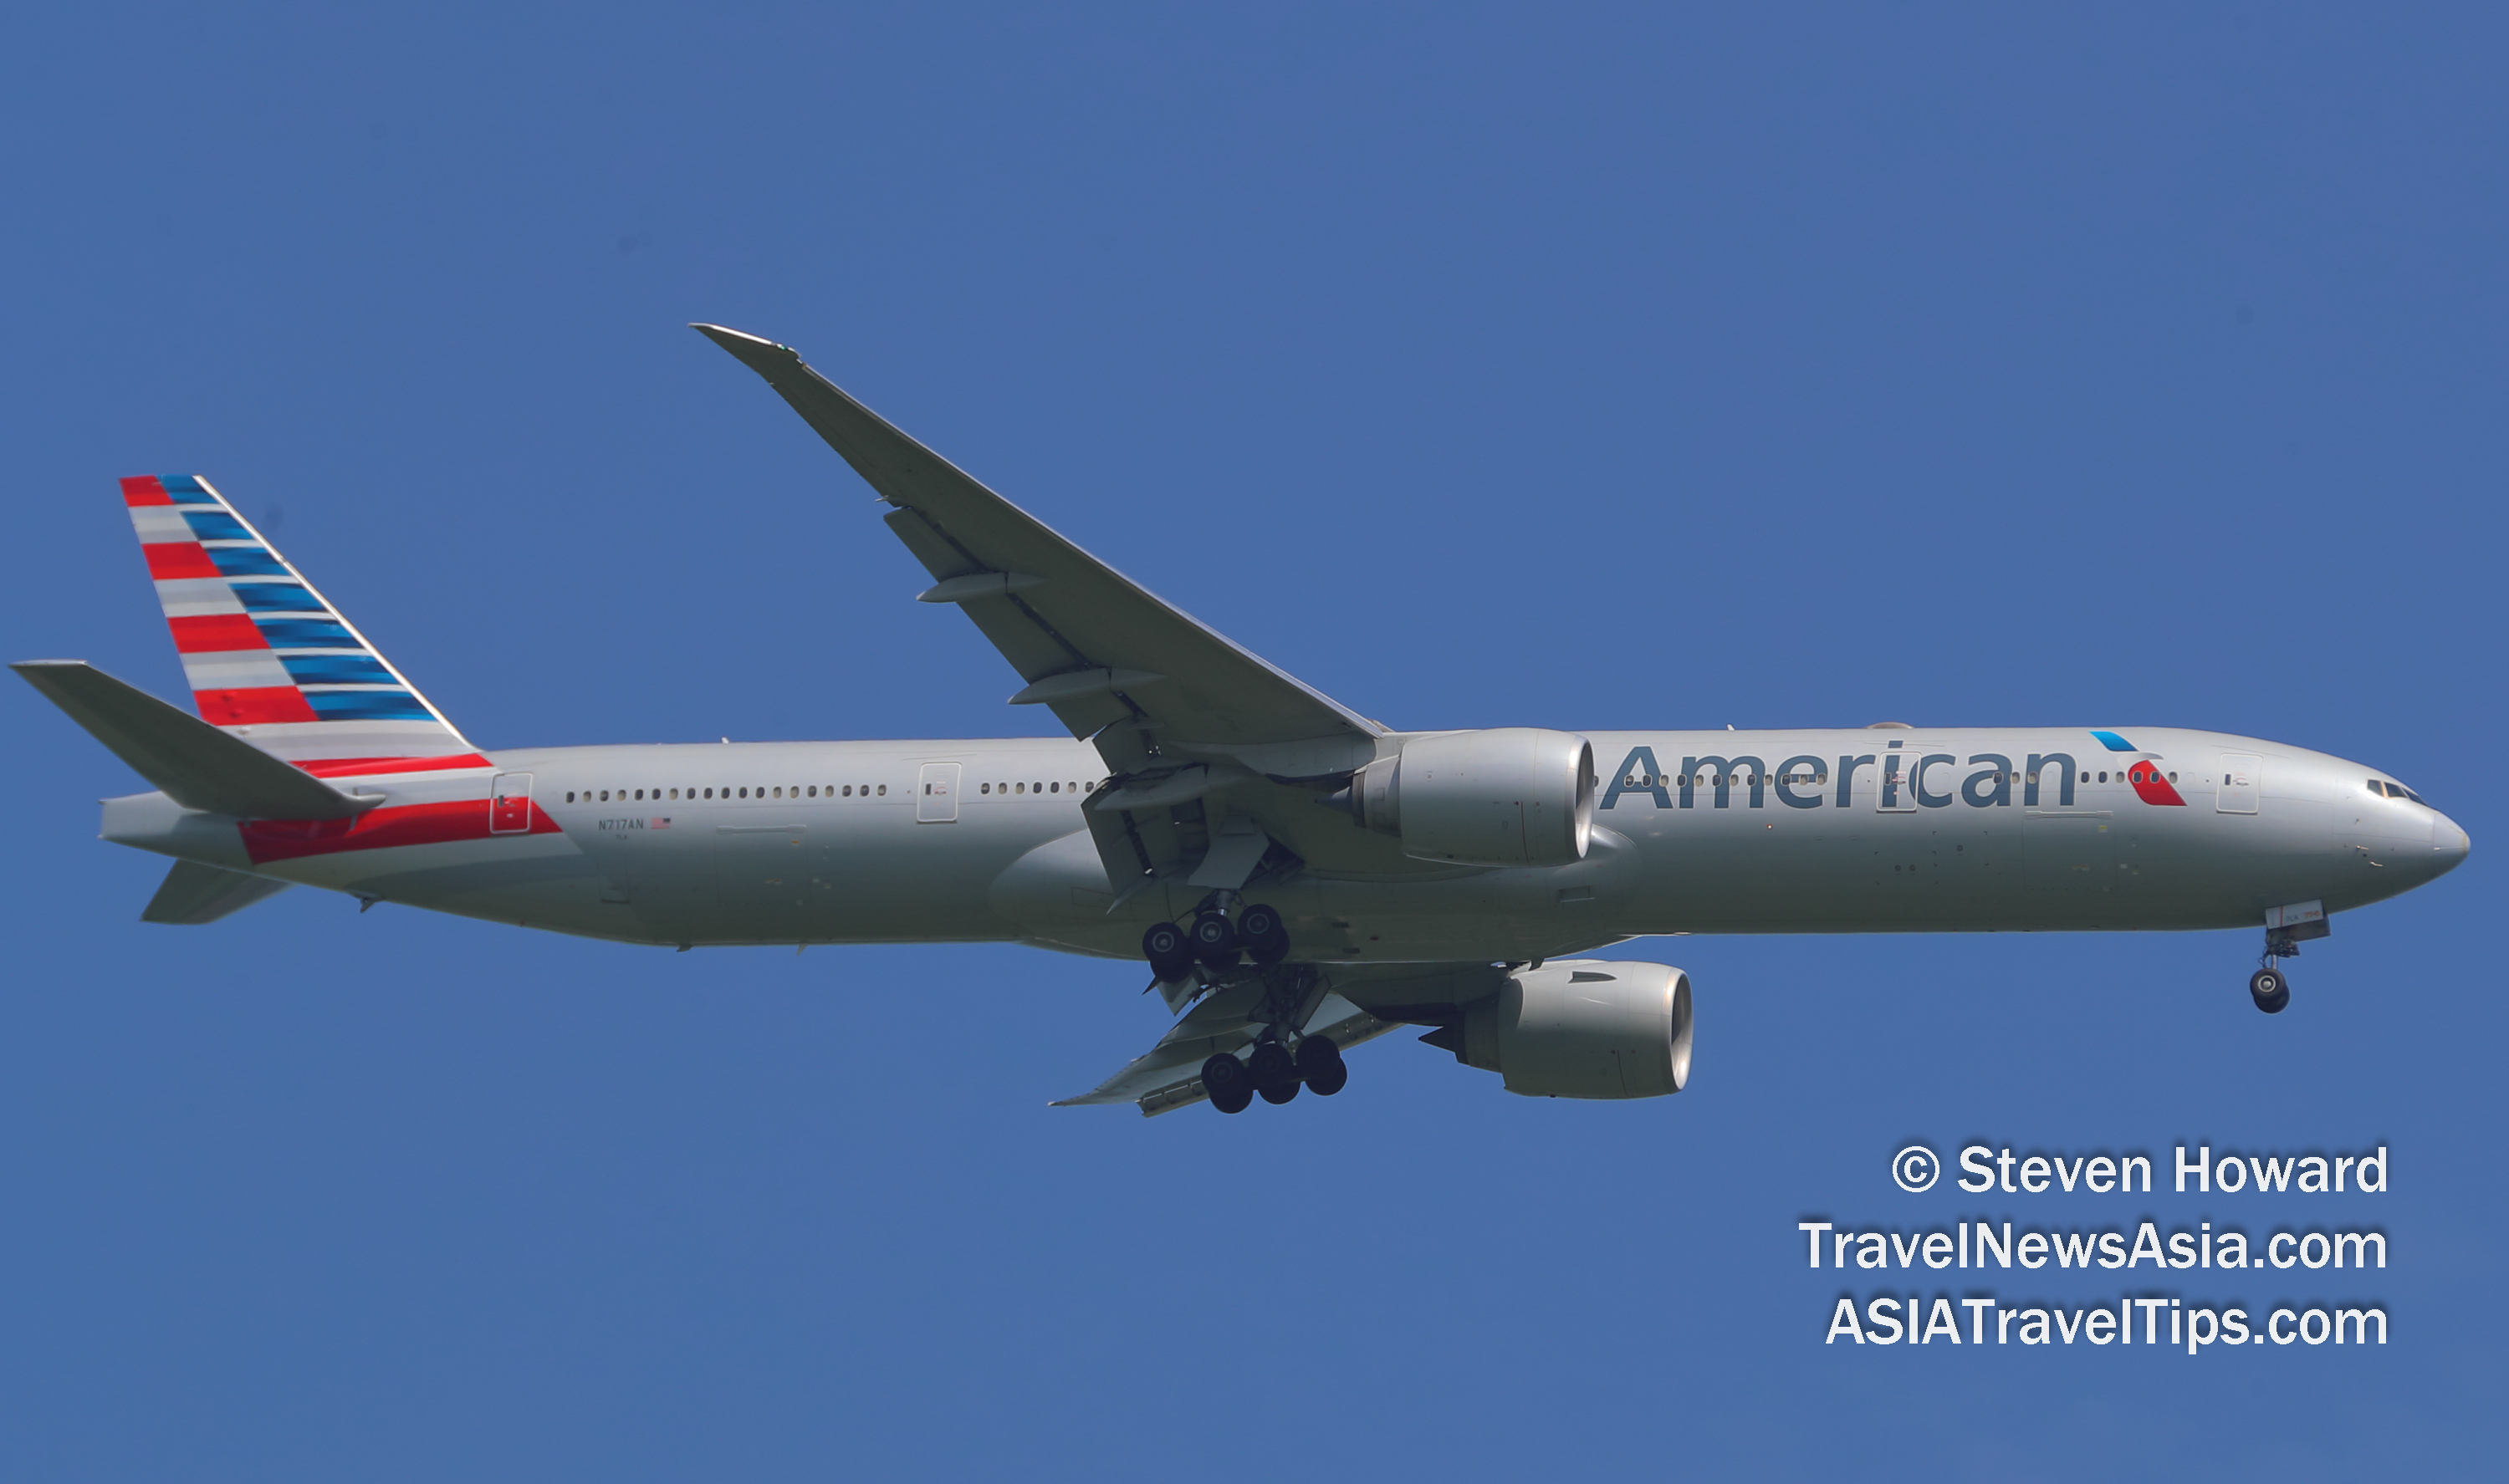 American Airlines Boeing 777-300 reg: N717AN. Picture by Steven Howard of TravelNewsAsia.com . Click to enlarge.